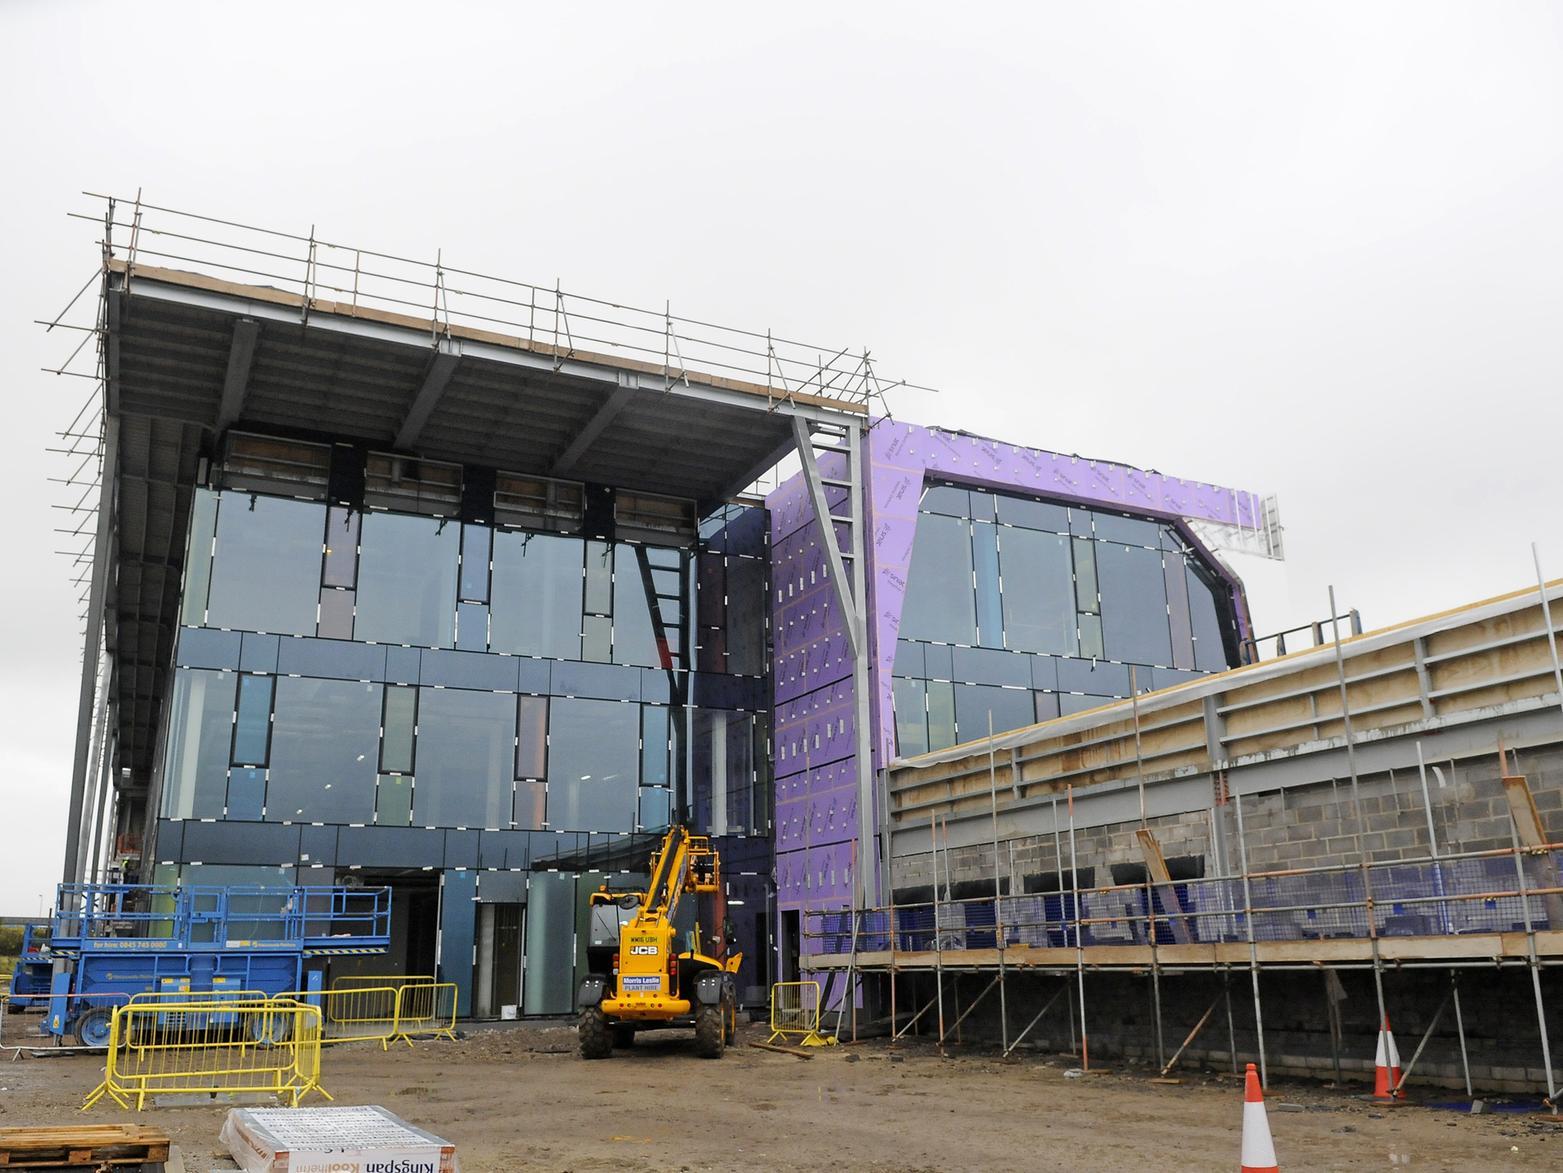 Work on the new 21m police station began in 2016.Built on Clifton Road in Martonfollowing the demolition of Progress House, the new offices officially opened in 2018.